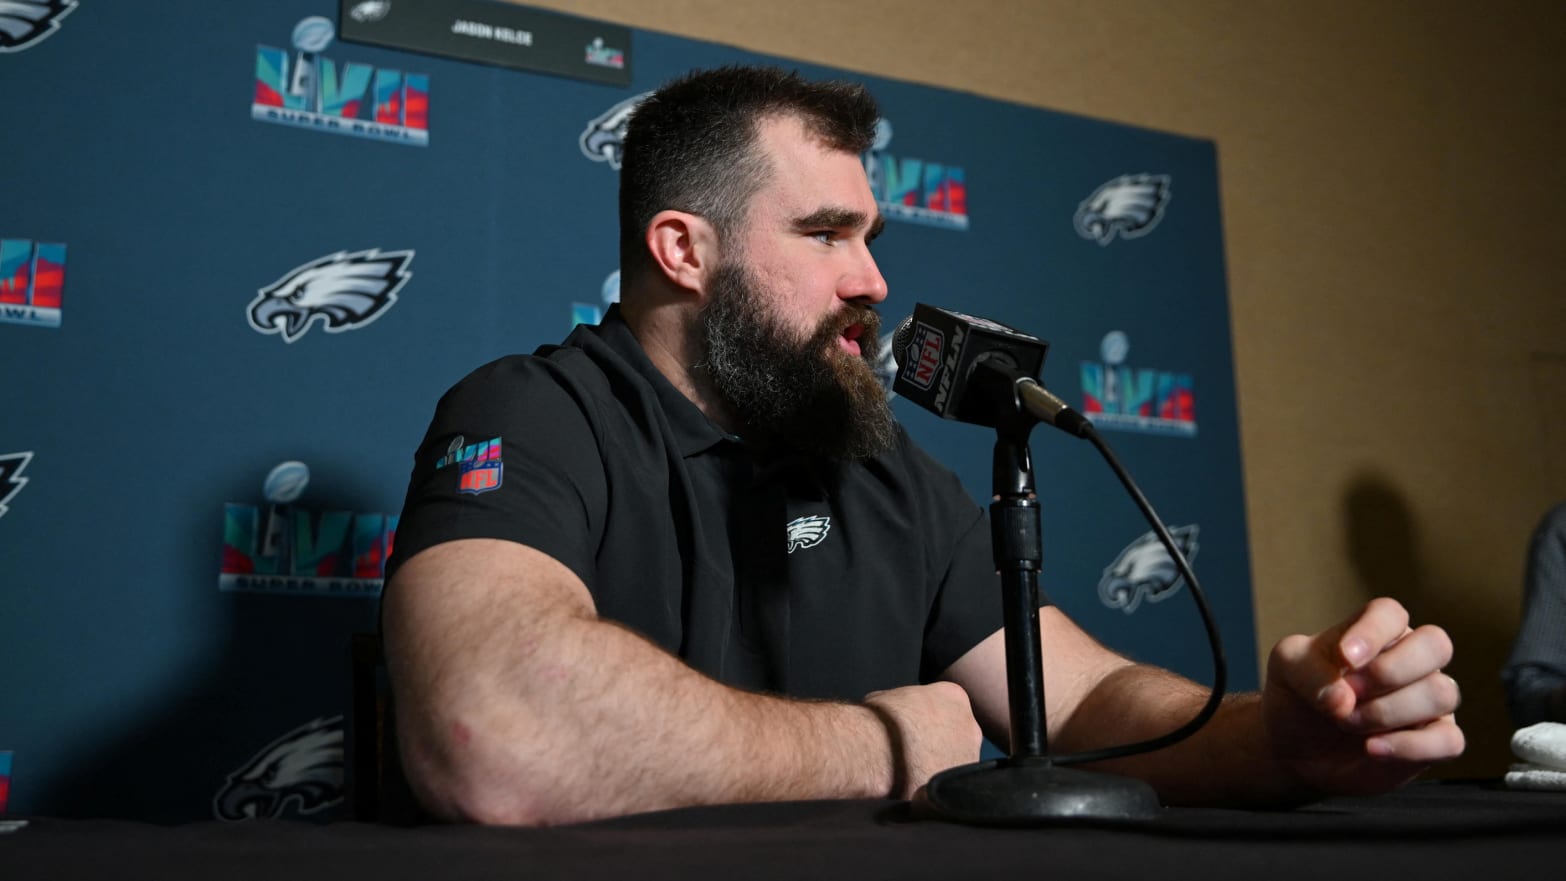 Speculation Emerges: Jason Kelce Eyeing a Transition to TV Analyst Like Tom Brady or Remaining in Philadelphia as a Coach.